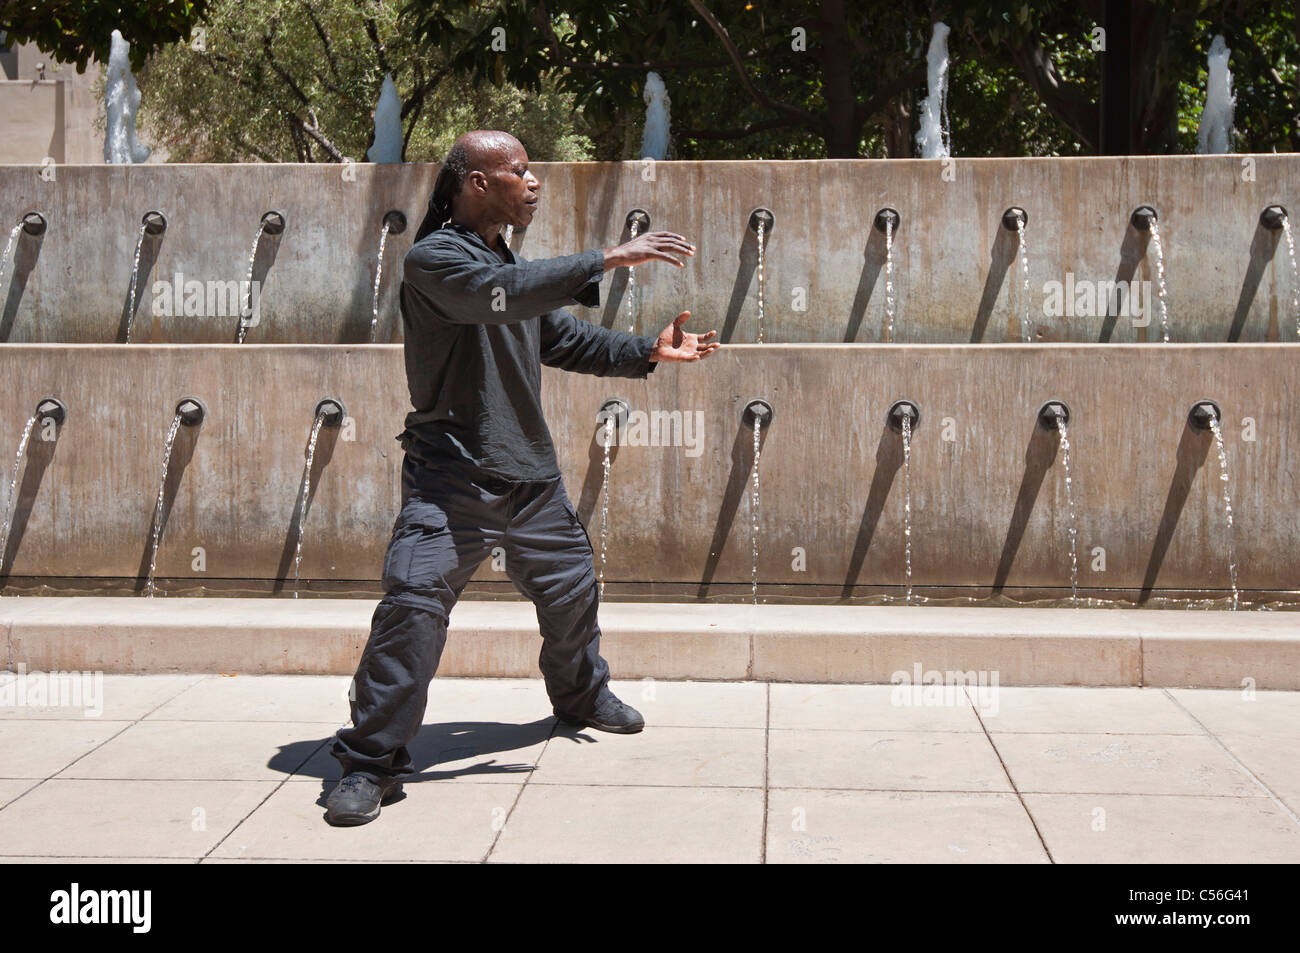 Man practicing Tai Chi in public in front of a fountain. Stock Photo